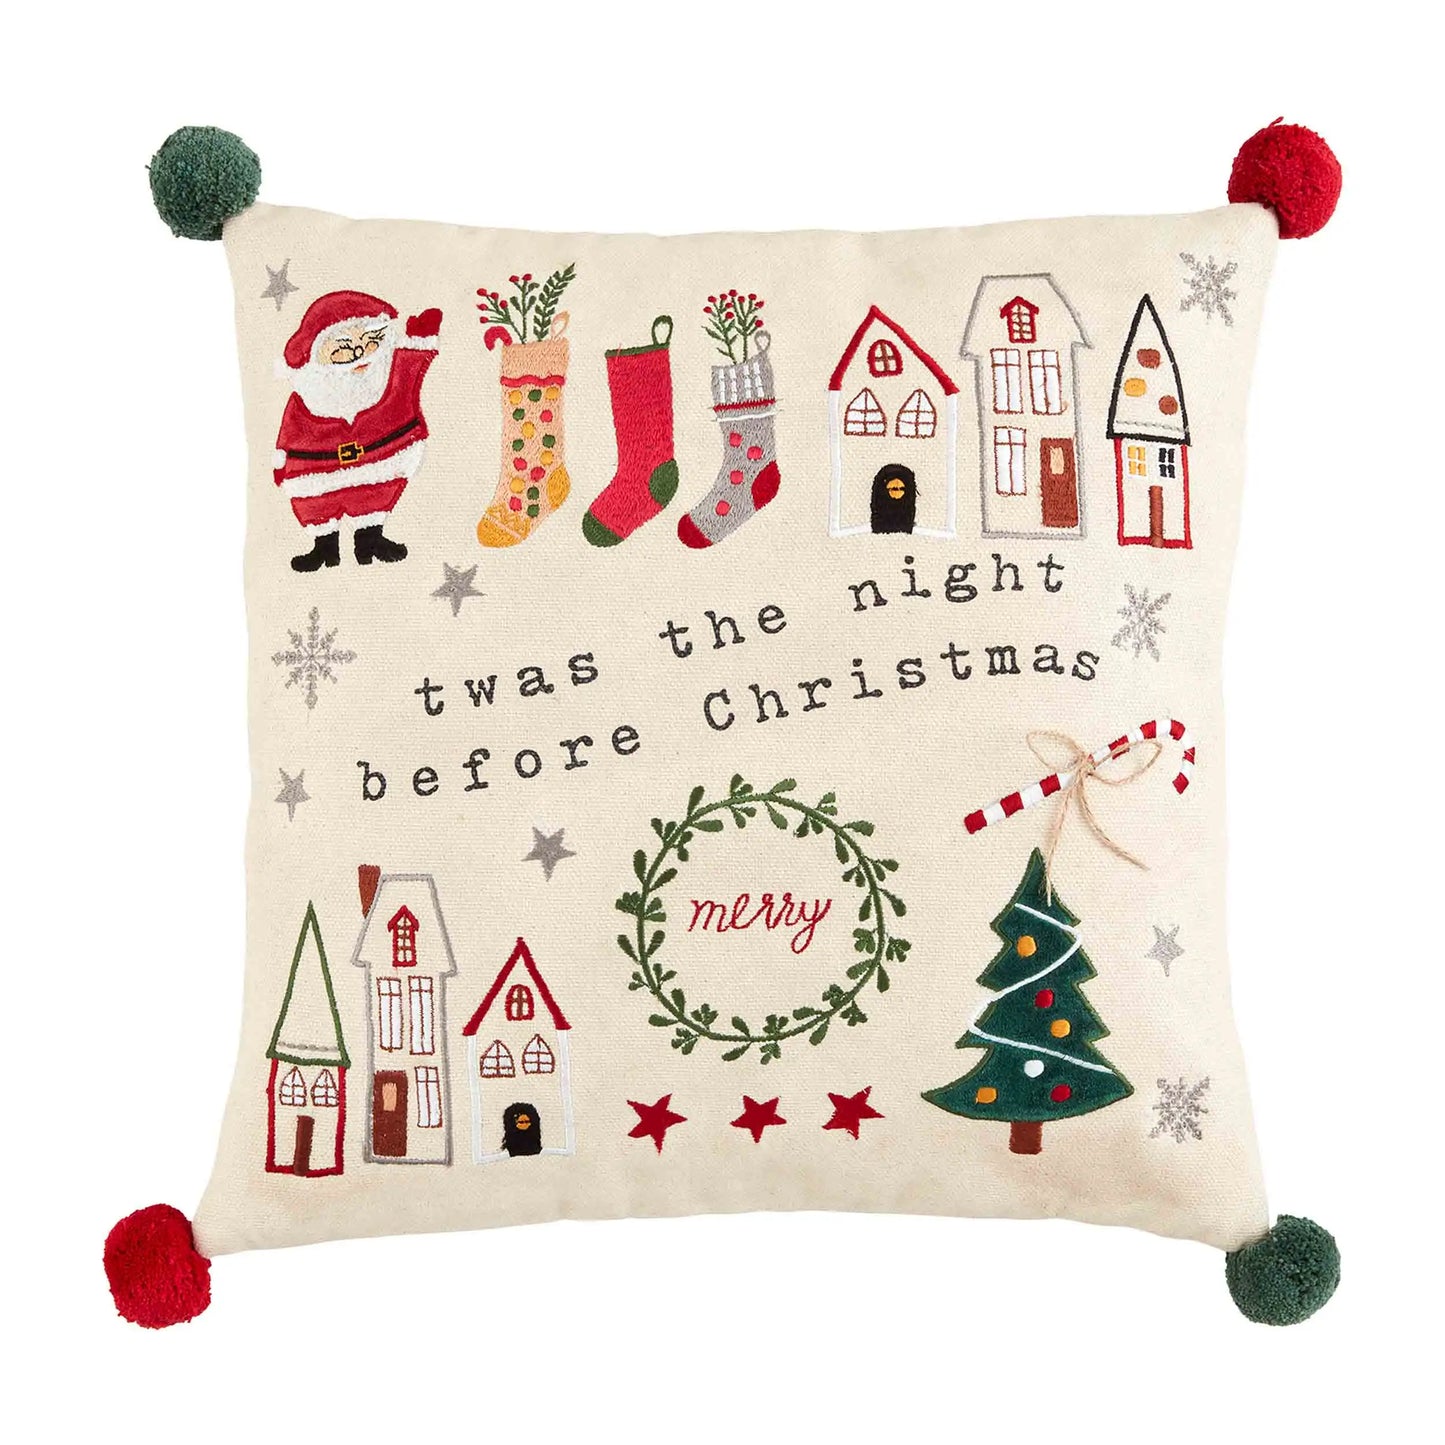 ‘Twas the Night Before Christmas Pillow